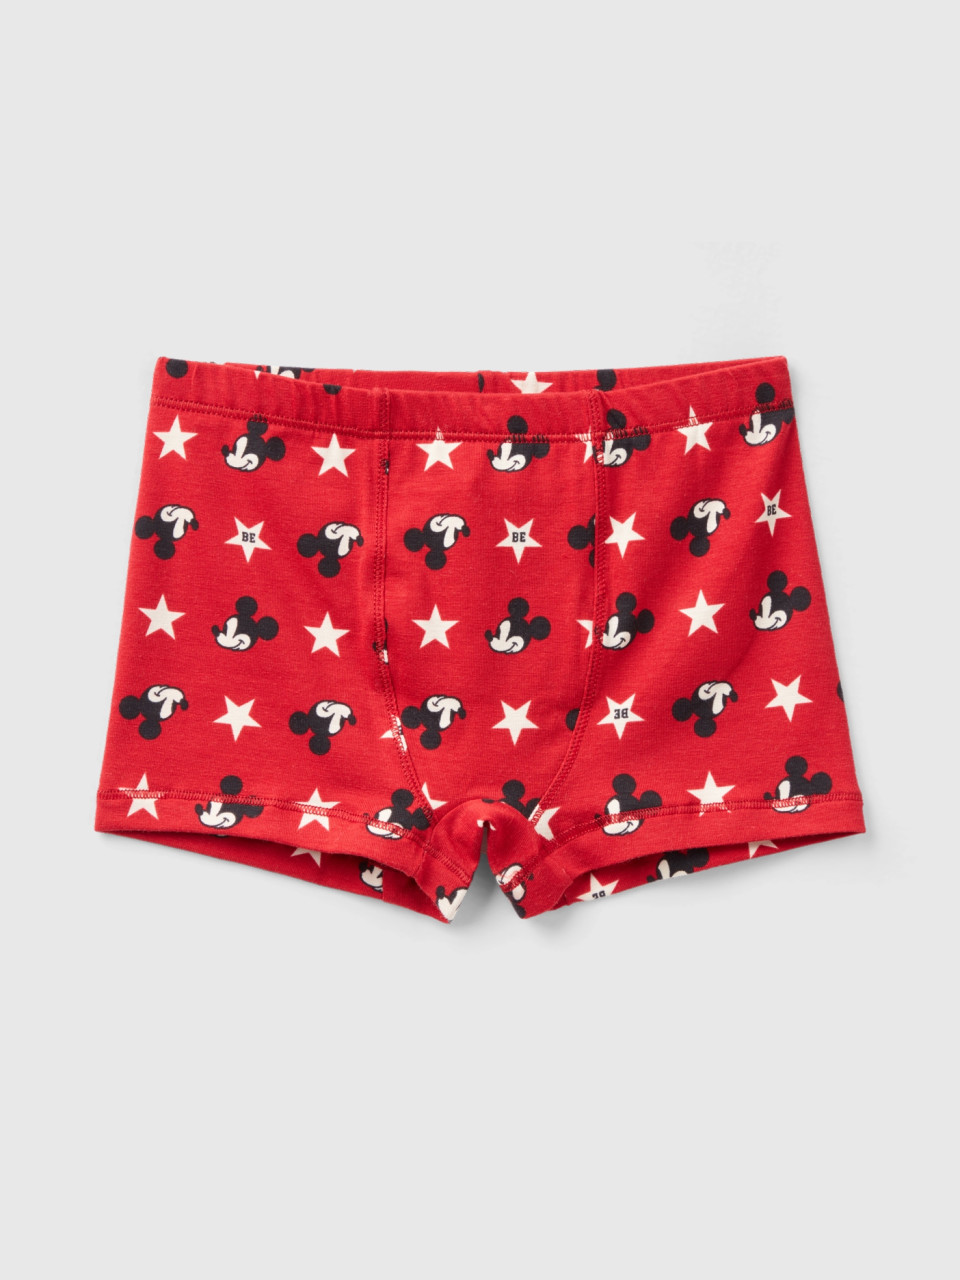 Benetton, Red Mickey Mouse Boxers, Red, Kids